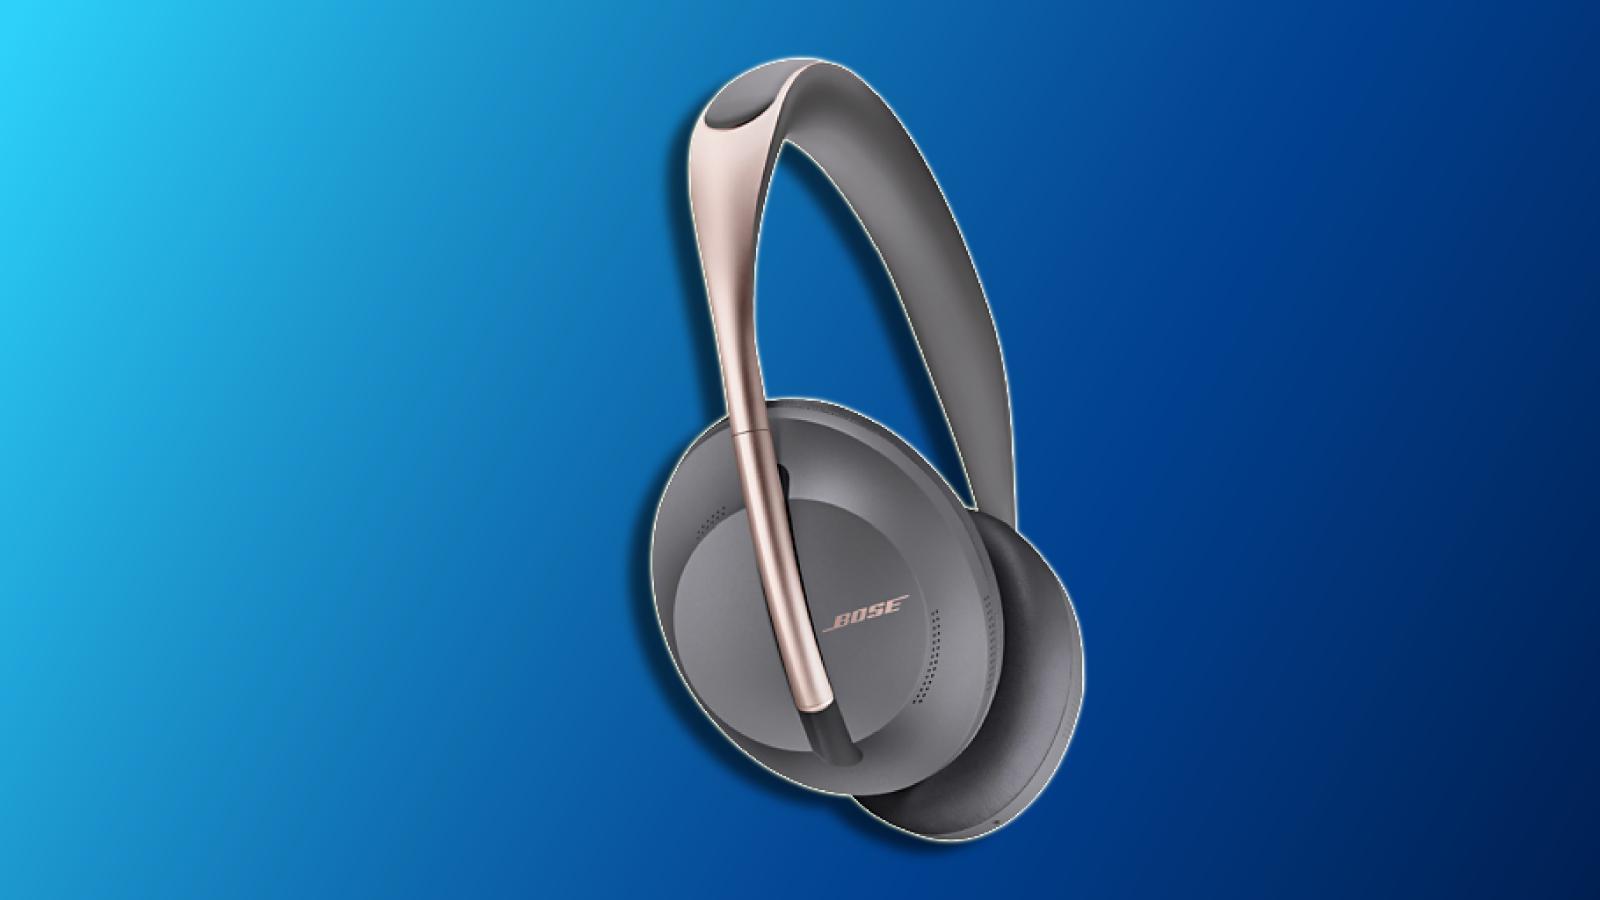 Bose 700 Headphones - Are They The Best? 